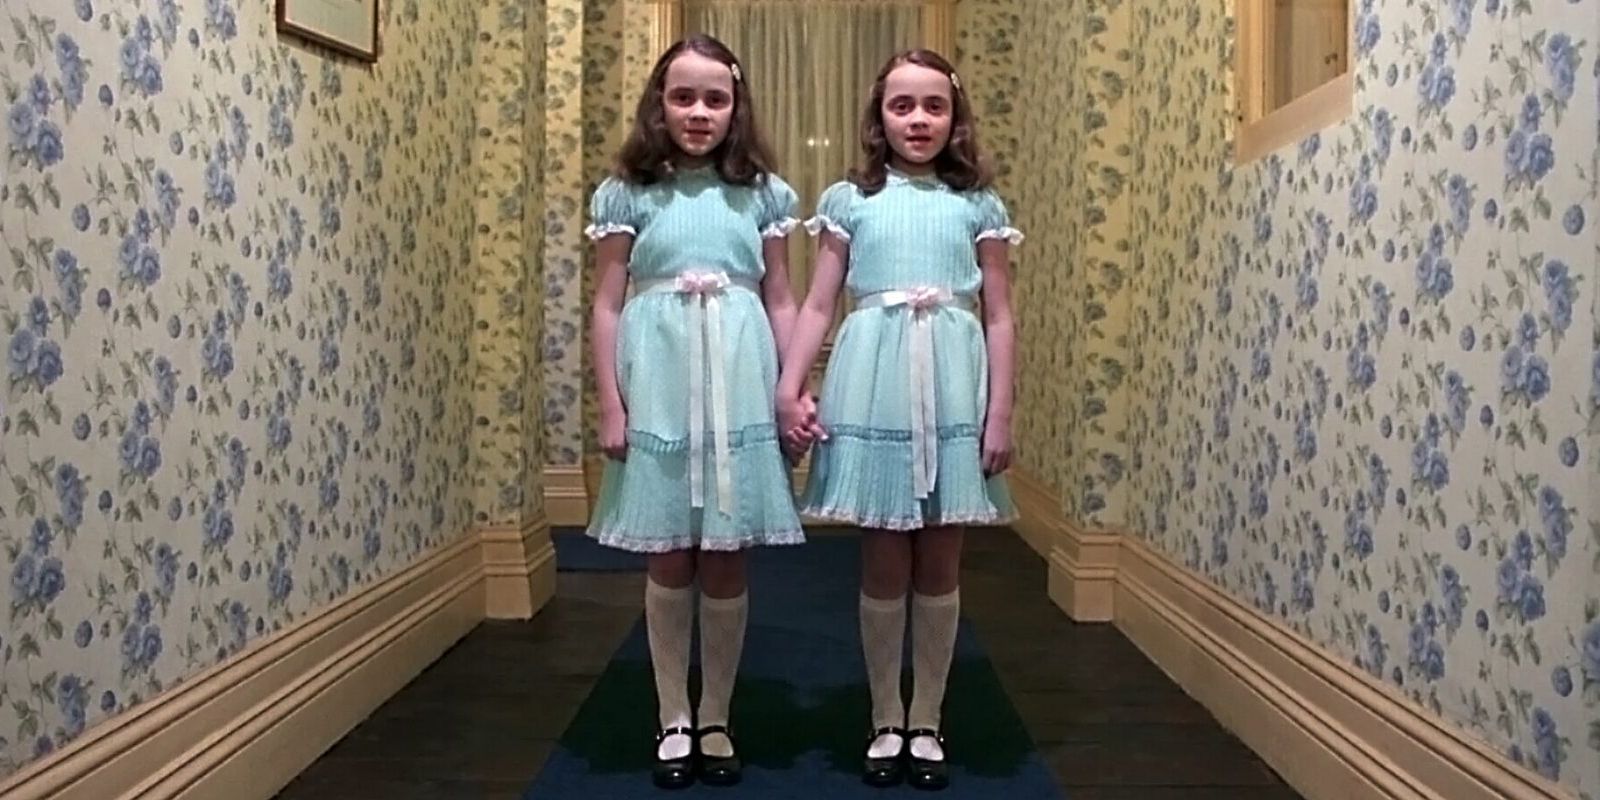 The dead girls in Stanley Kubrick's The Shining.